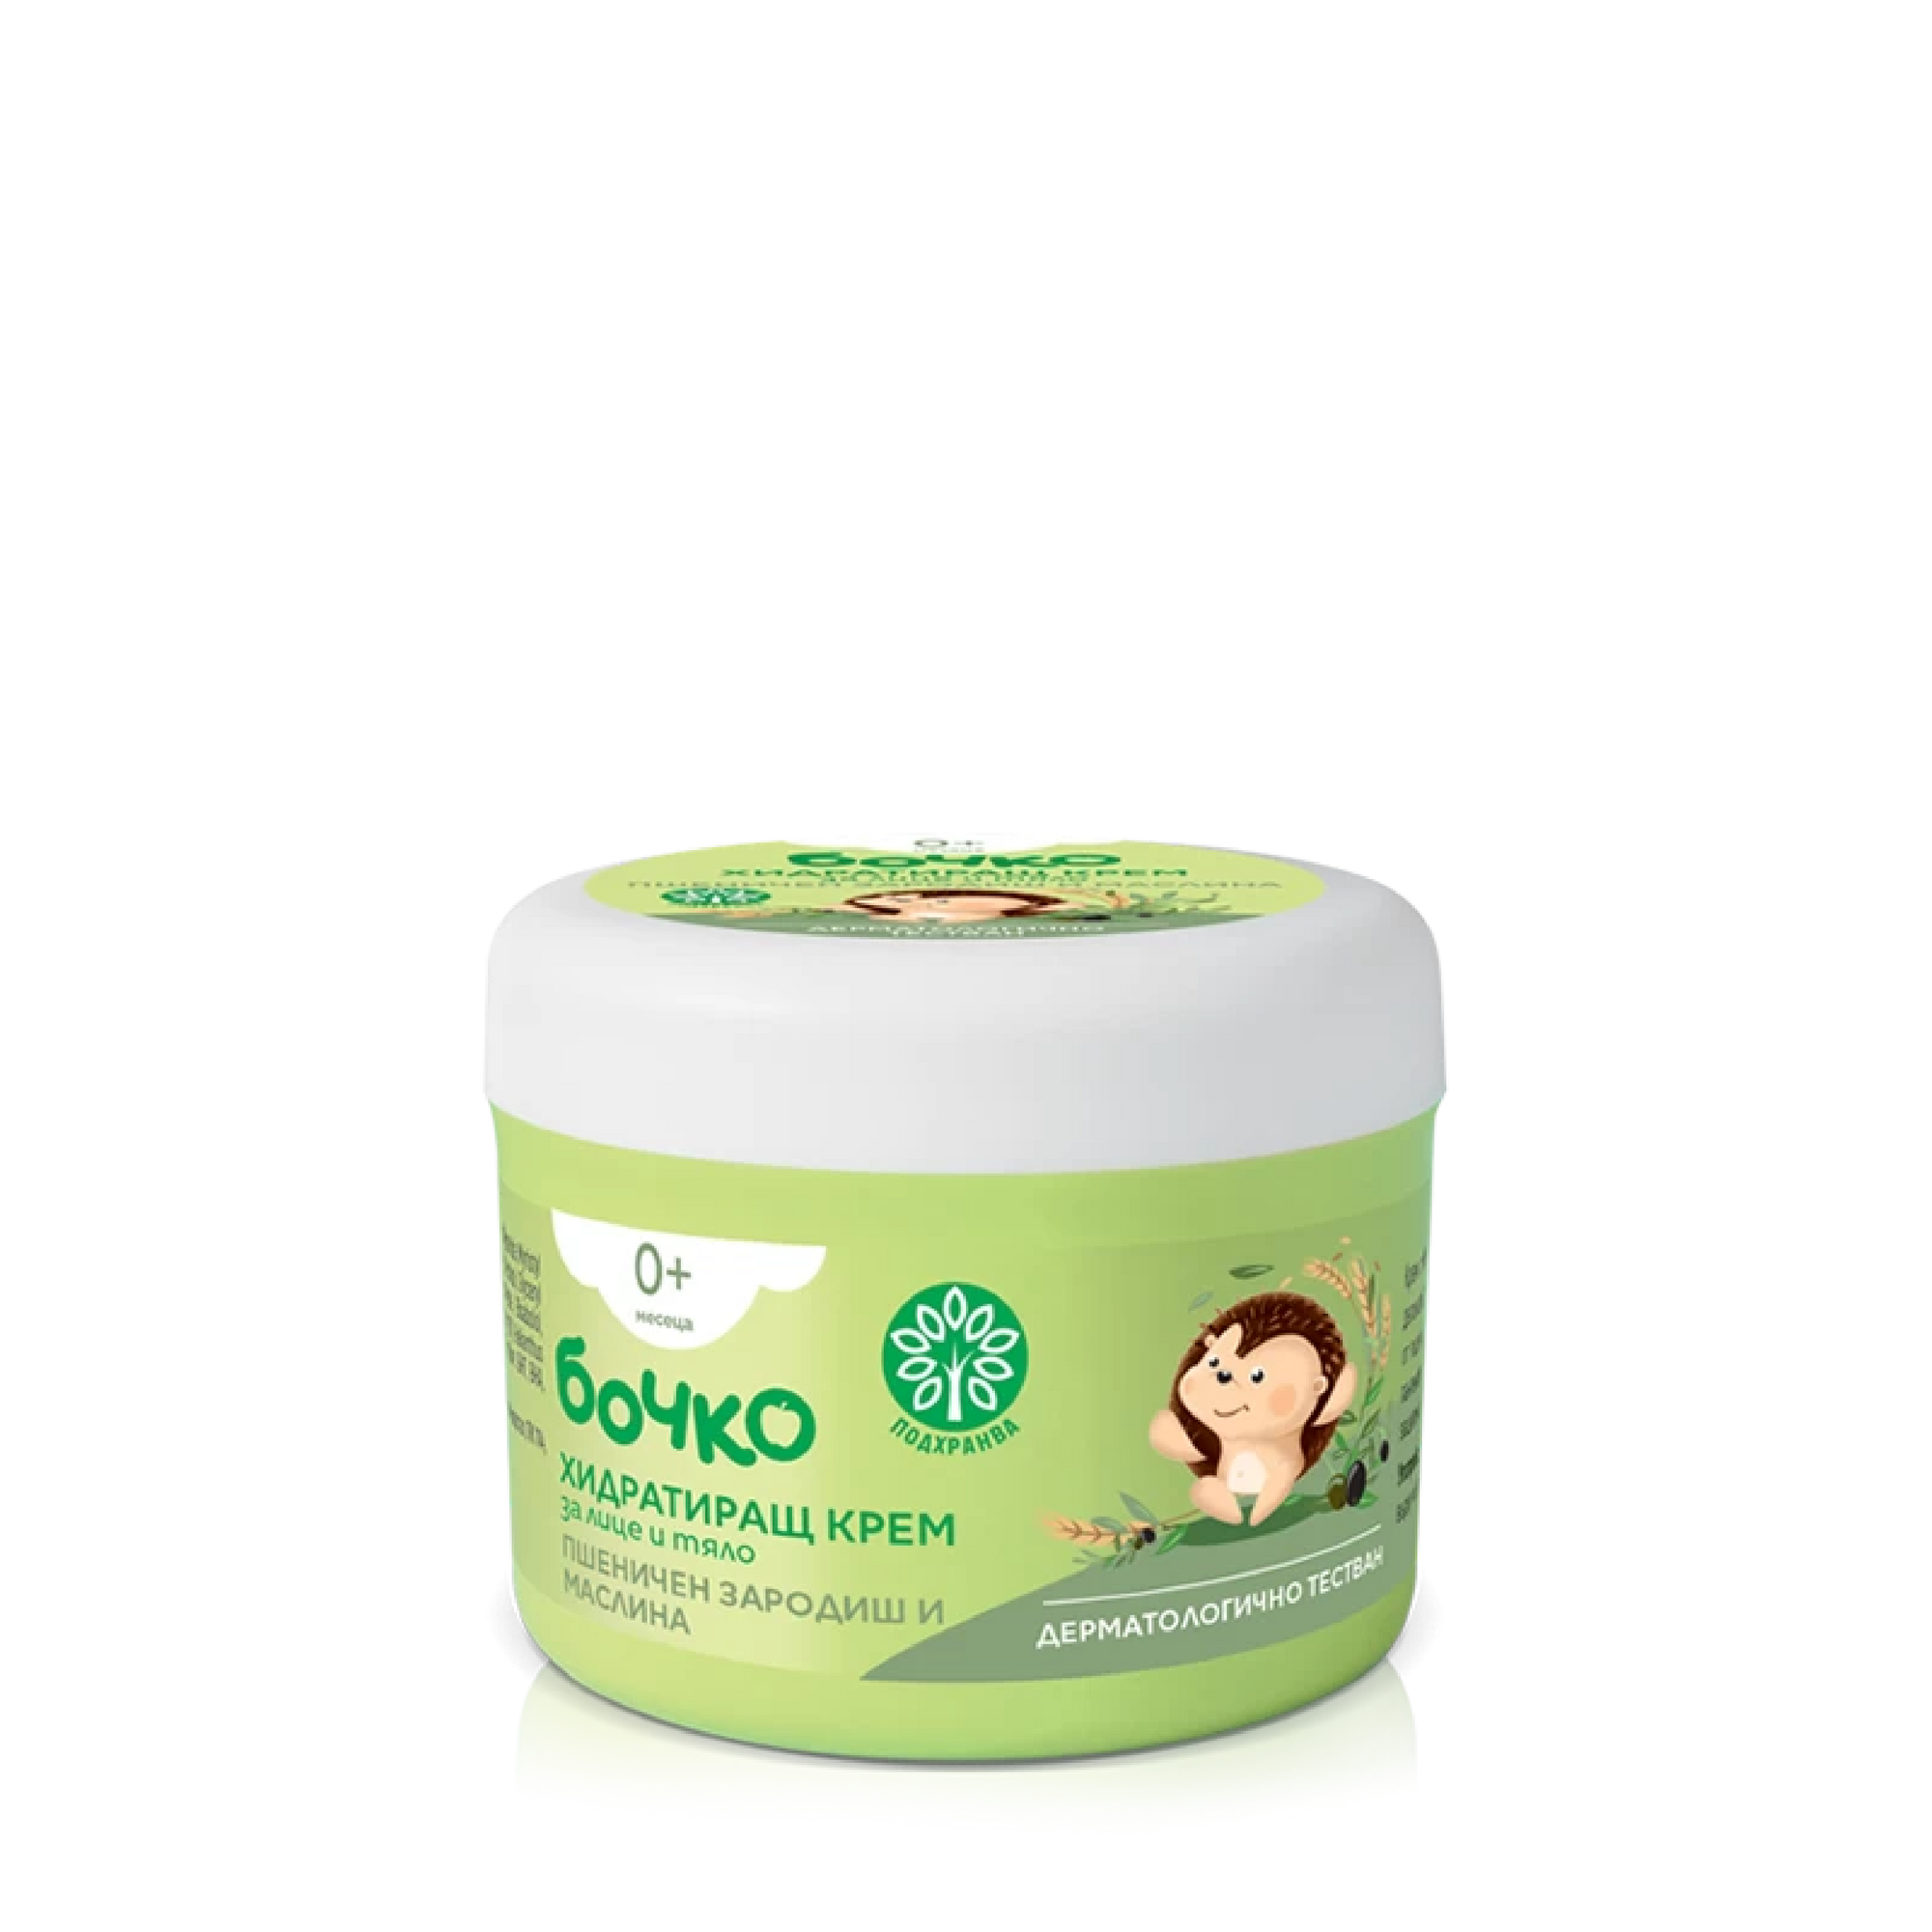 Moisturising baby cream with Wheat germ and Olive 240ml | by Kuker